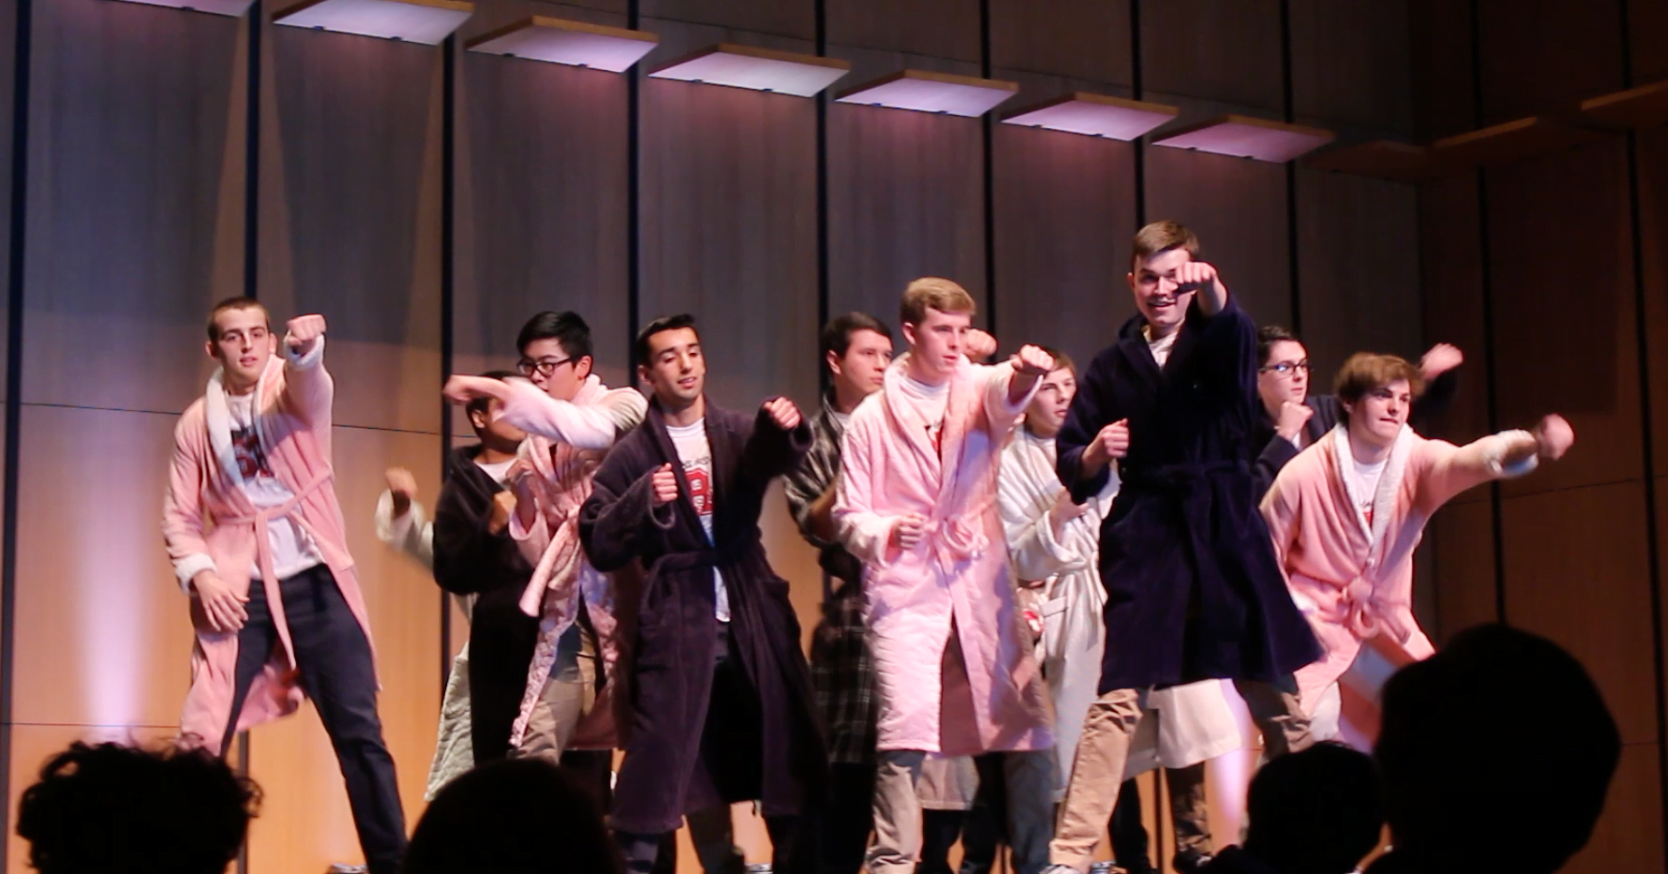  Senior boys perform a dance based on the song It's Raining Men. March 9, 2017 Photo: Leslie Yager